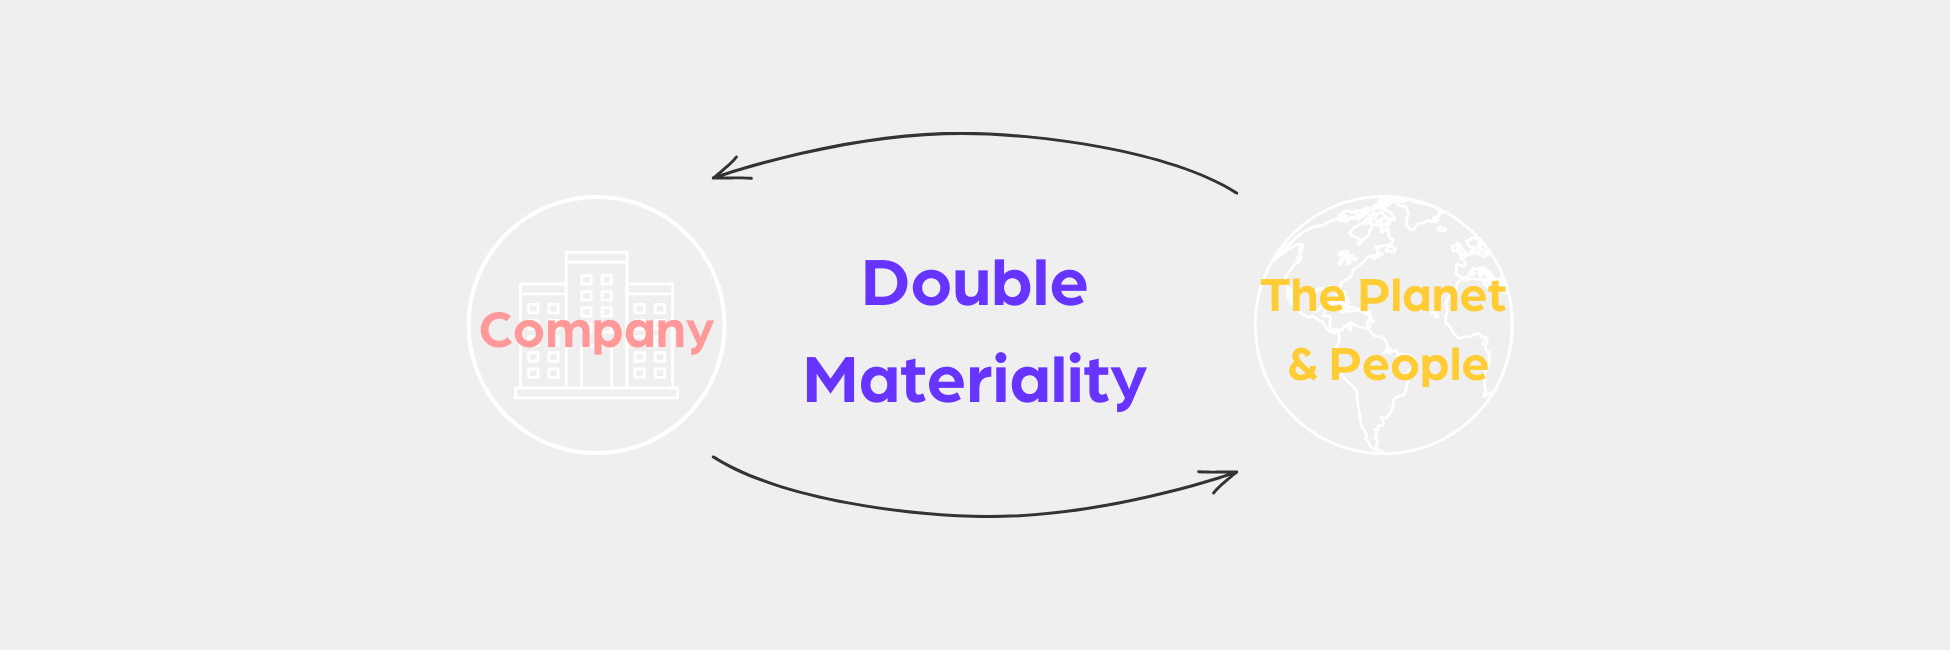 Understanding double materiality and complying to CSRd